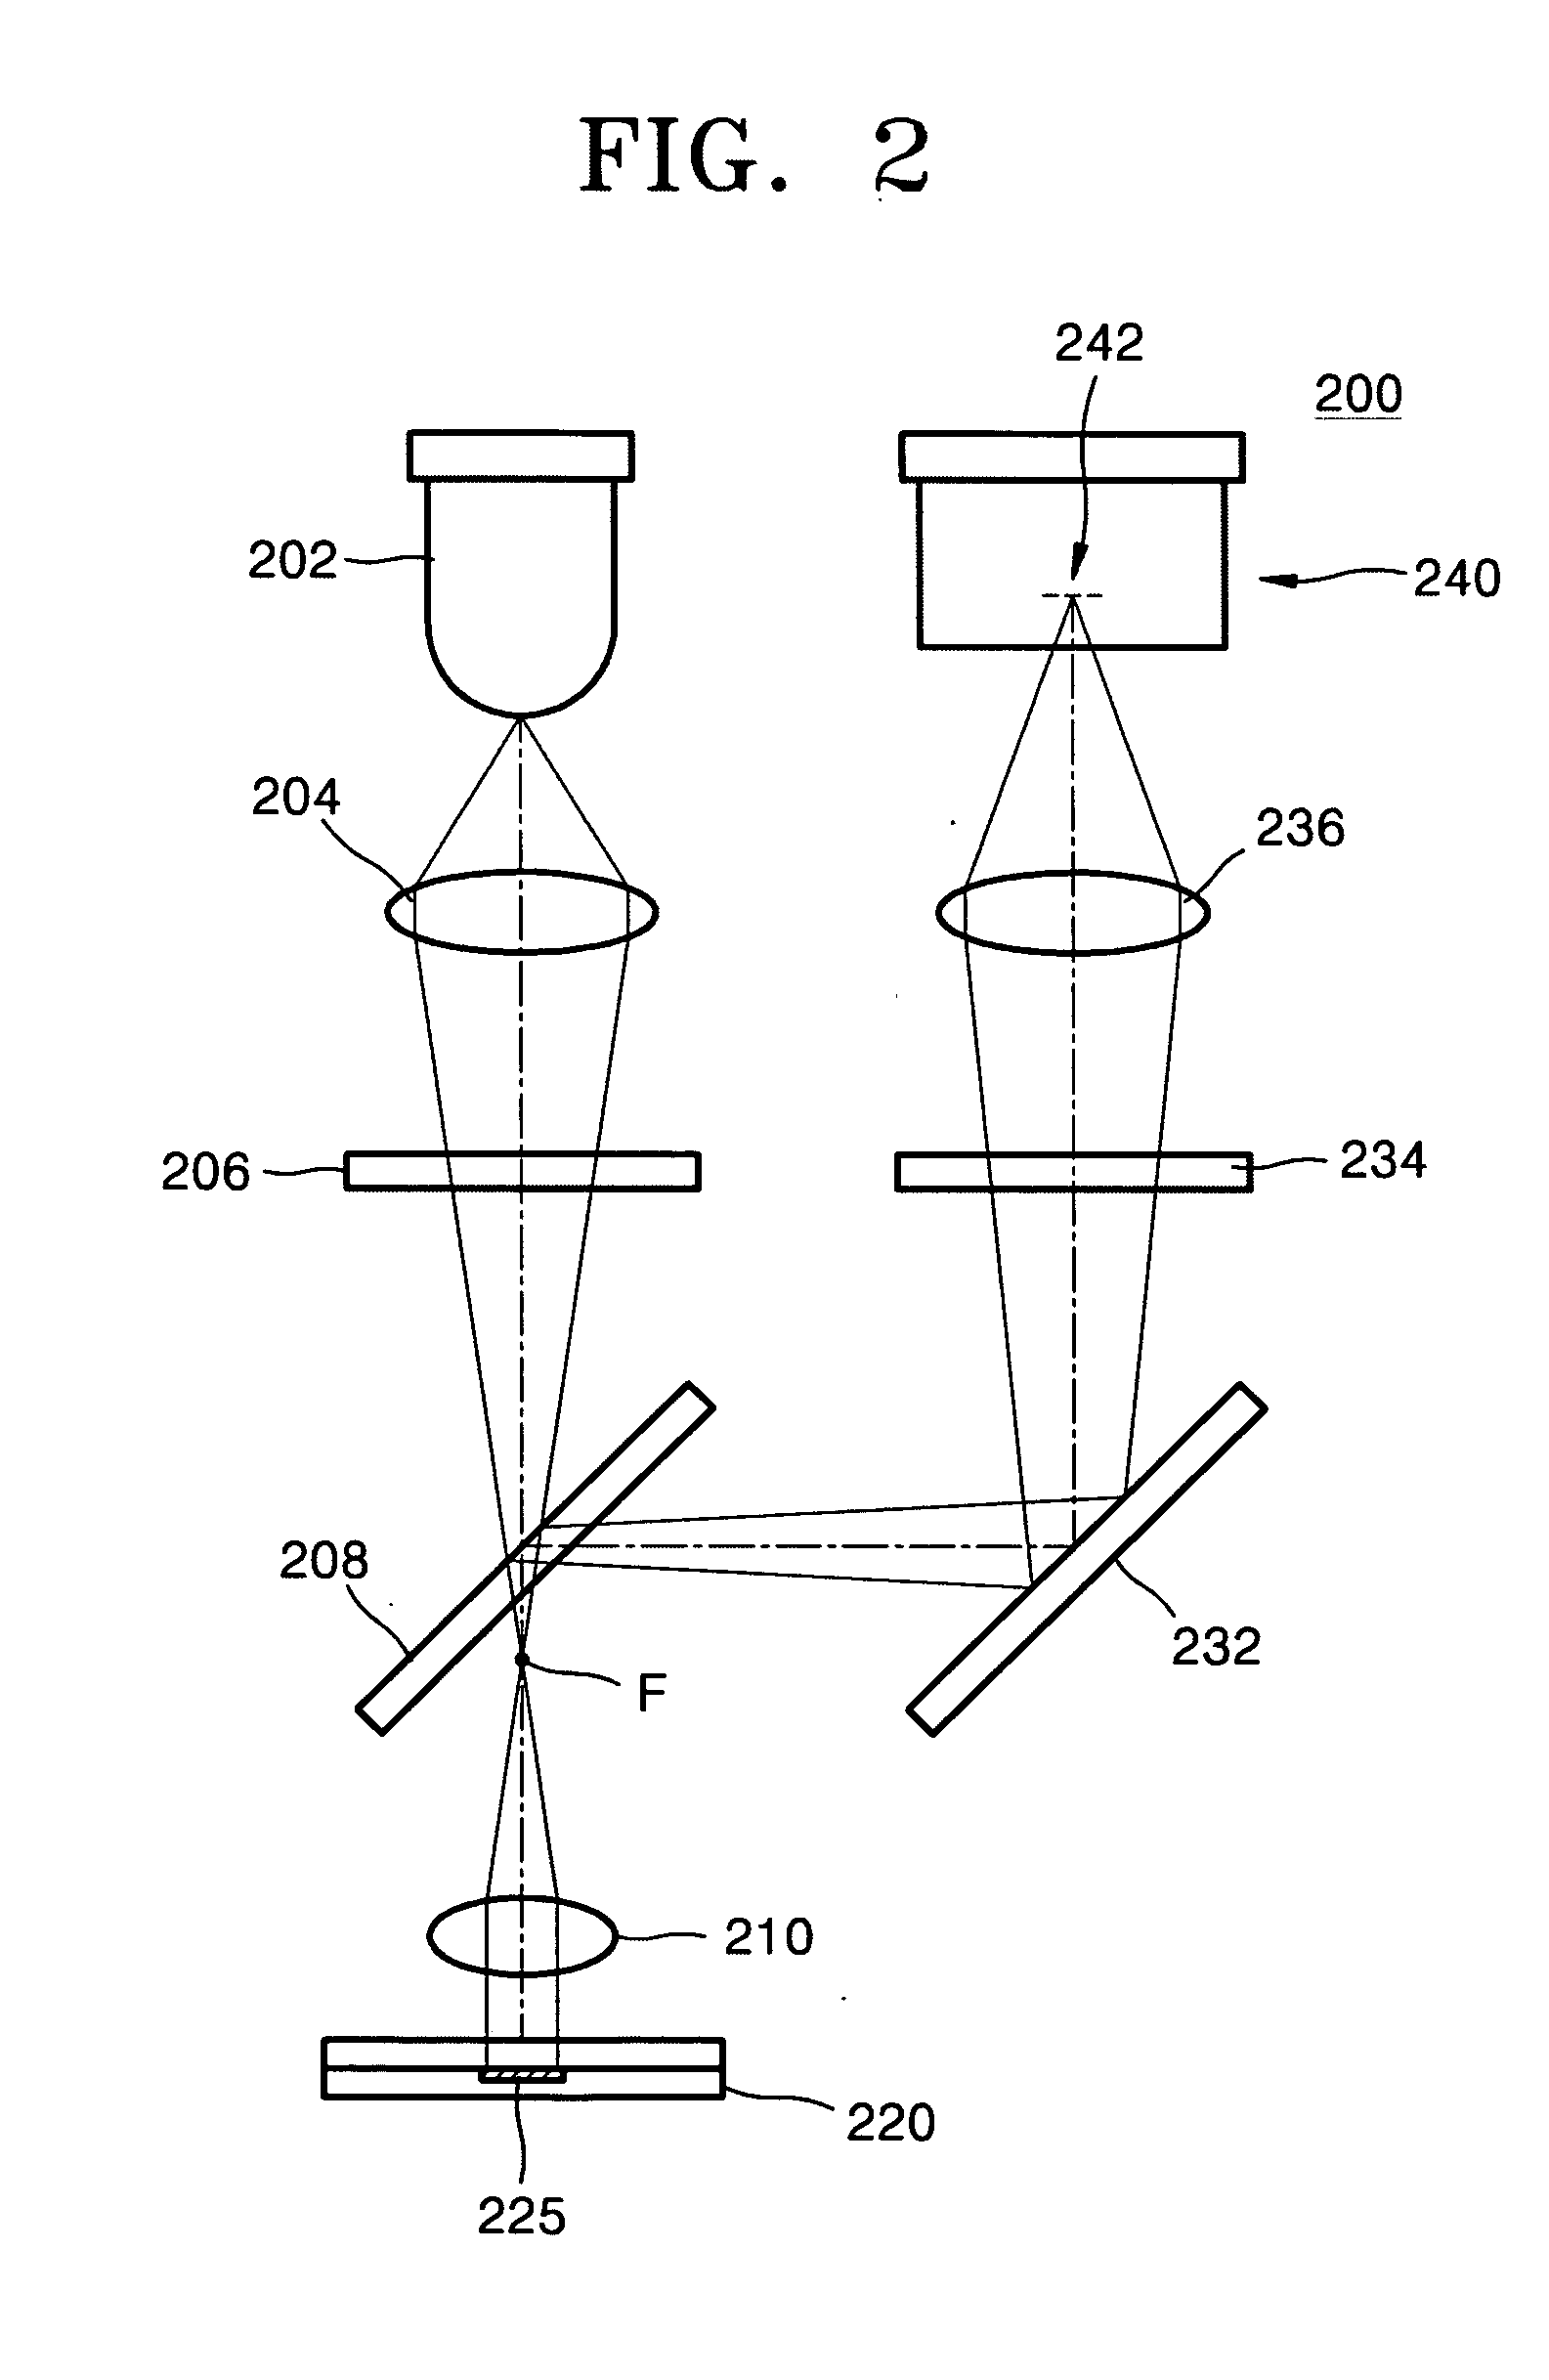 Fluorescence detector for detecting microfluid